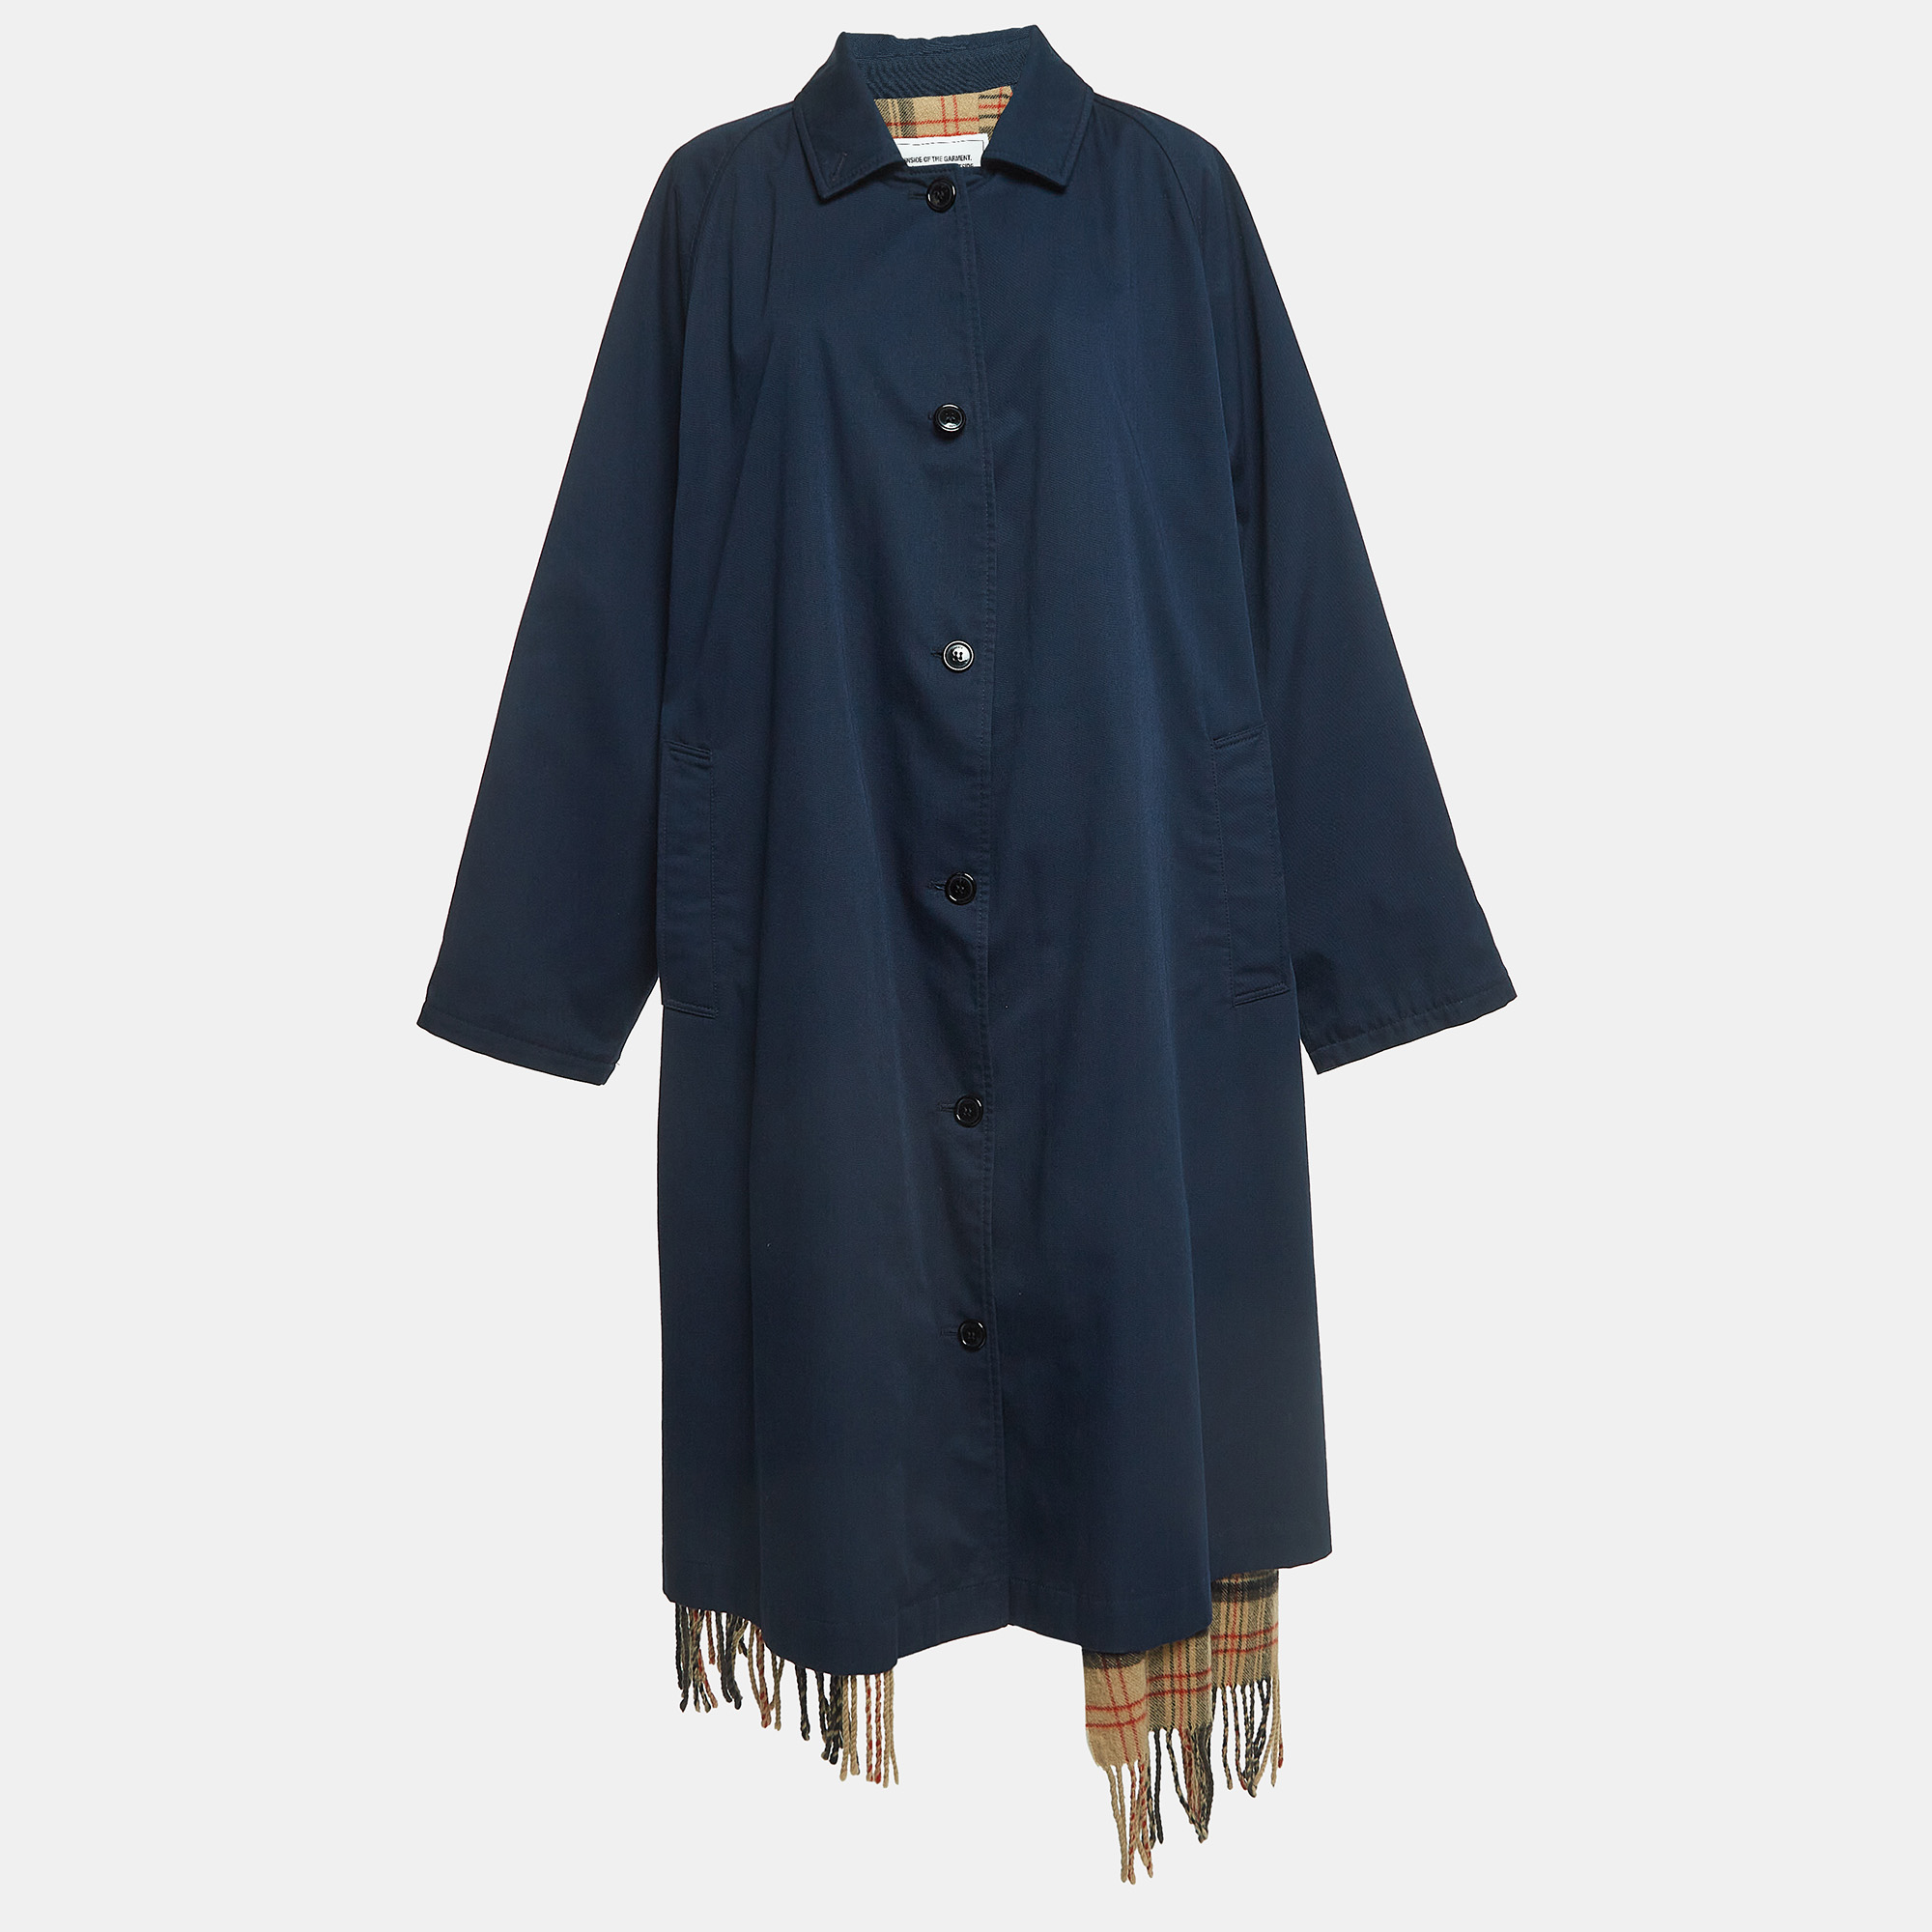 The Vetements trench coat is a sophisticated outerwear piece seamlessly blending style and functionality. Crafted from high quality gabardine it features a unique integrated scarf detail adding a touch of avant garde flair to the classic trench coat design.